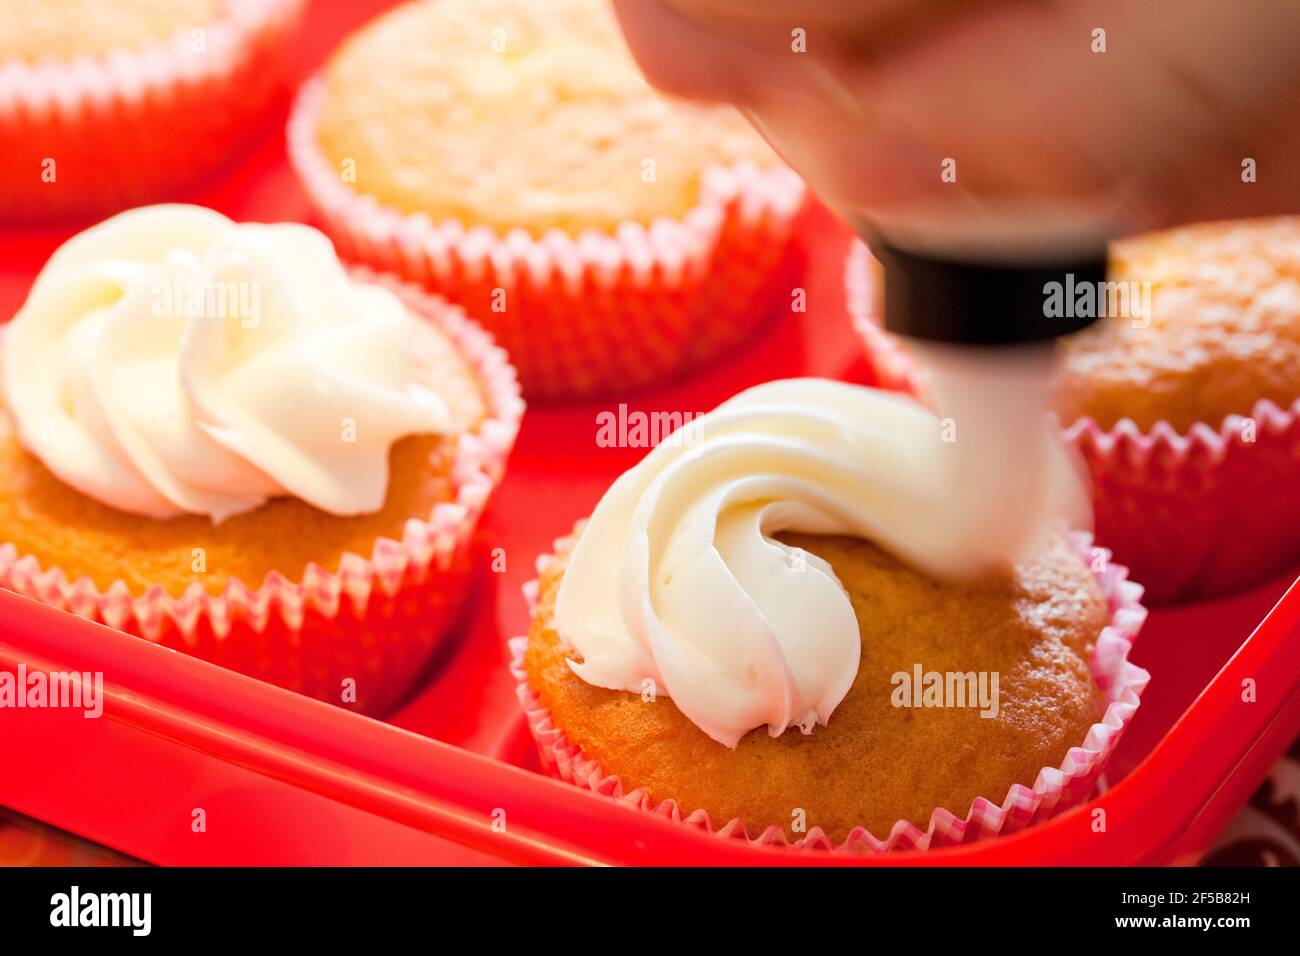 Applying white frosting on homemade cupcakes Stock Photo